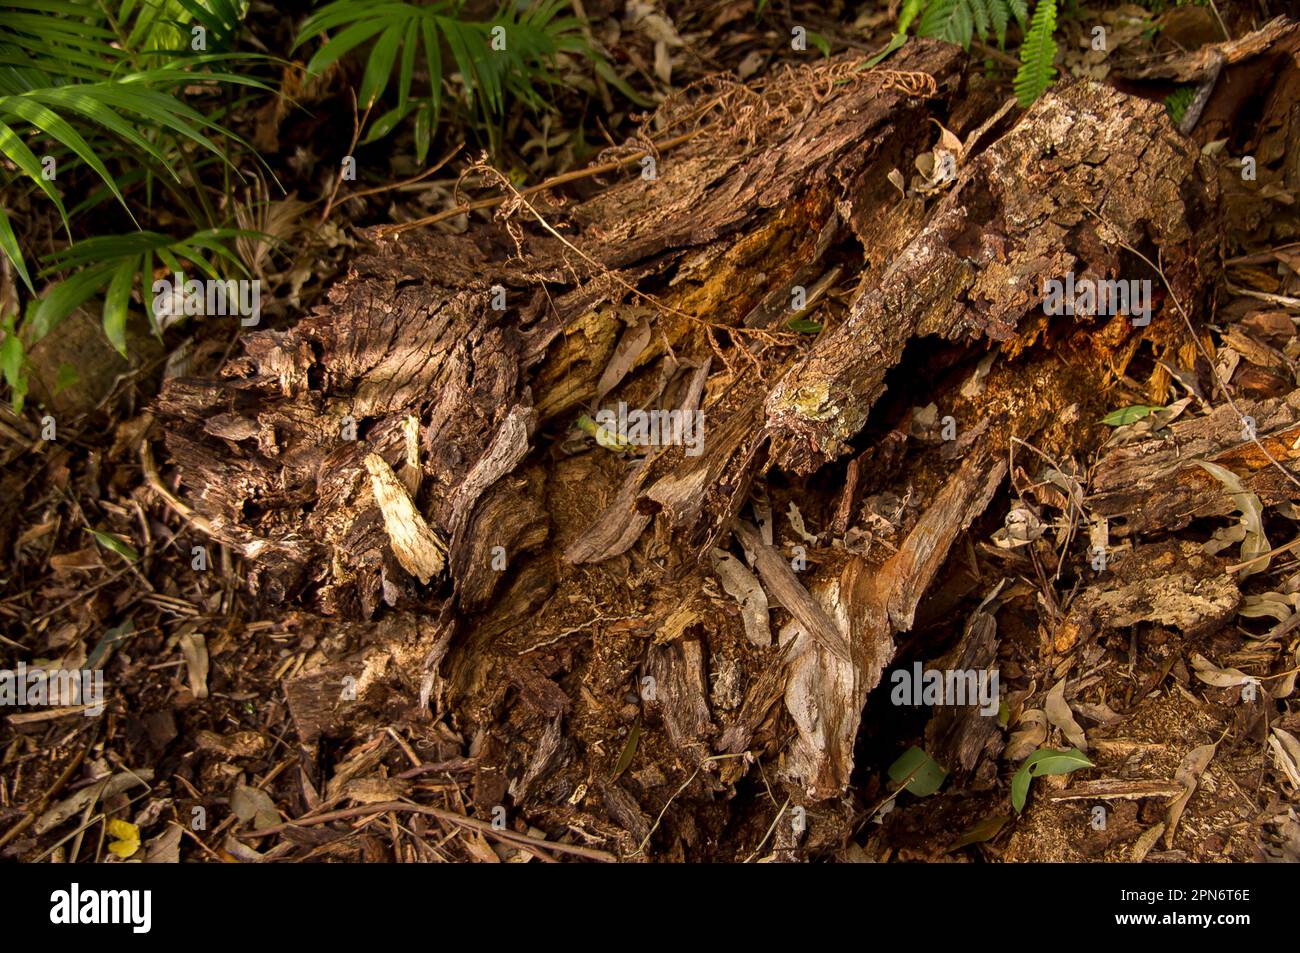 Organic debris on forest floor in Australian lowland subtropical rainforest in Queensland. Bark, leaves, rotting wood, form thick ground covering. Stock Photo